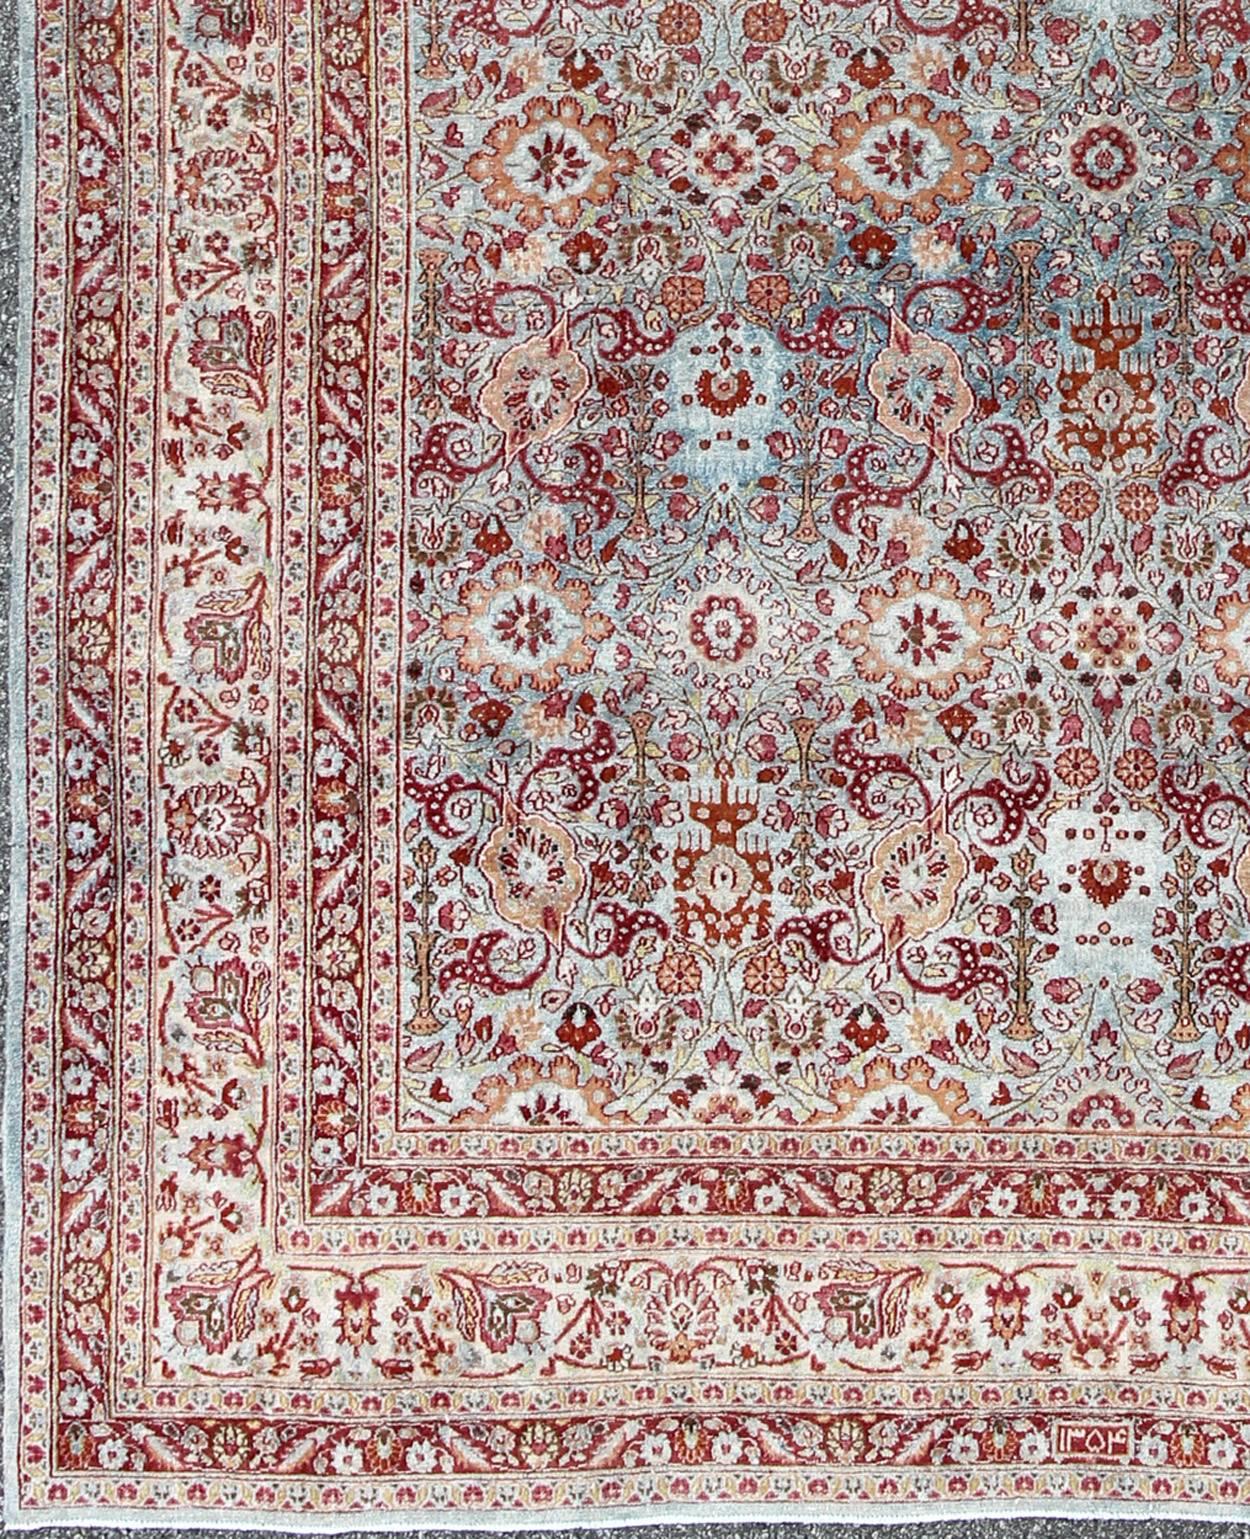 Ornate floral pattern Khorassan antique Persian rug in burgundy and grey, rug ema-7514, country of origin / type: Iran / Khorassan, circa 1920.

This spectacular antique Persian Khorasan carpet from early 20th century Iran bears a magnificent